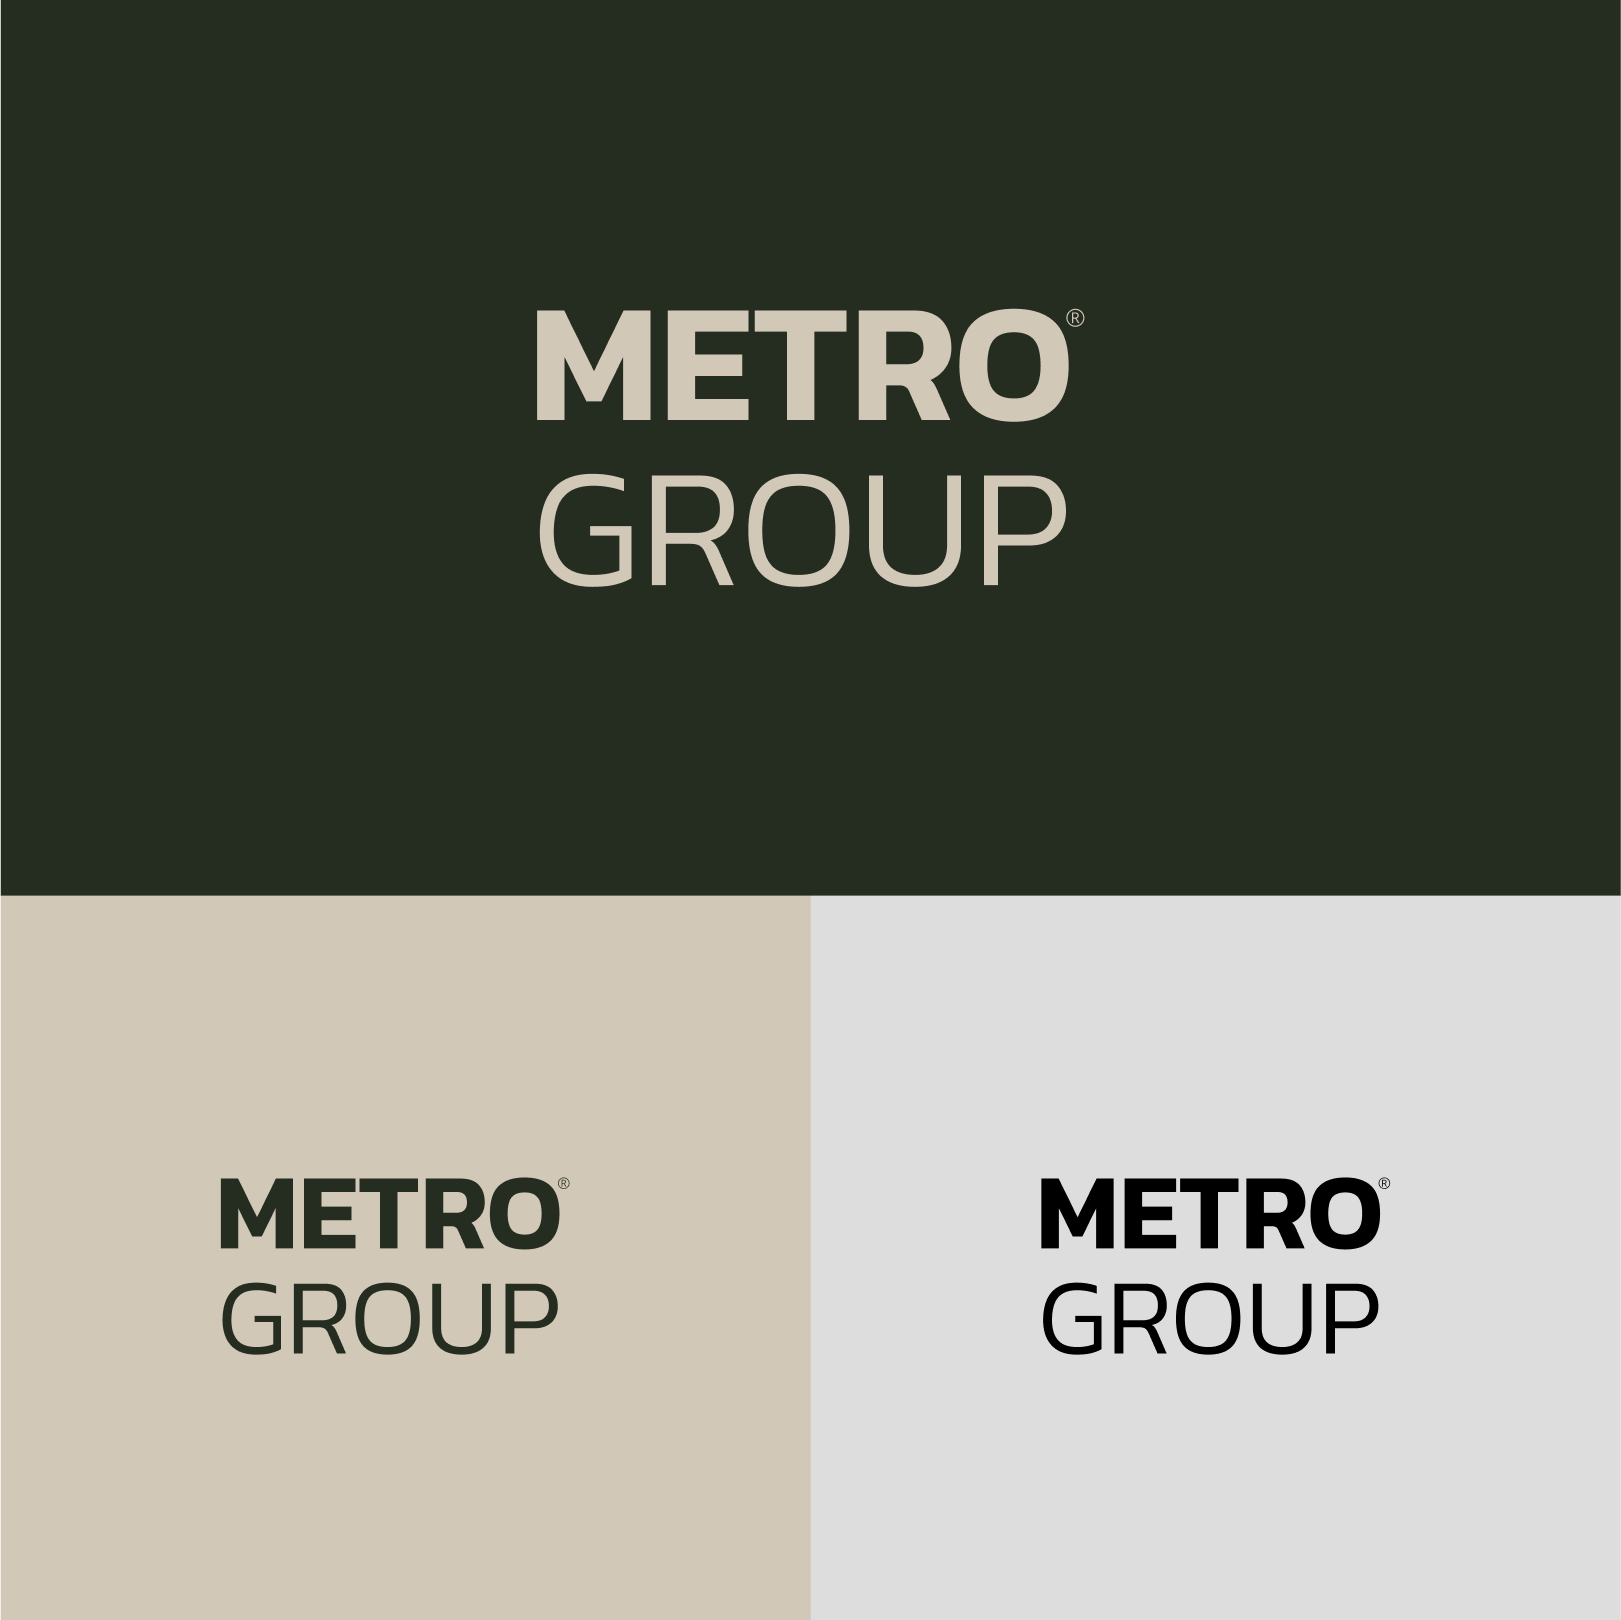 Metro Group logo design on different colored backgrounds